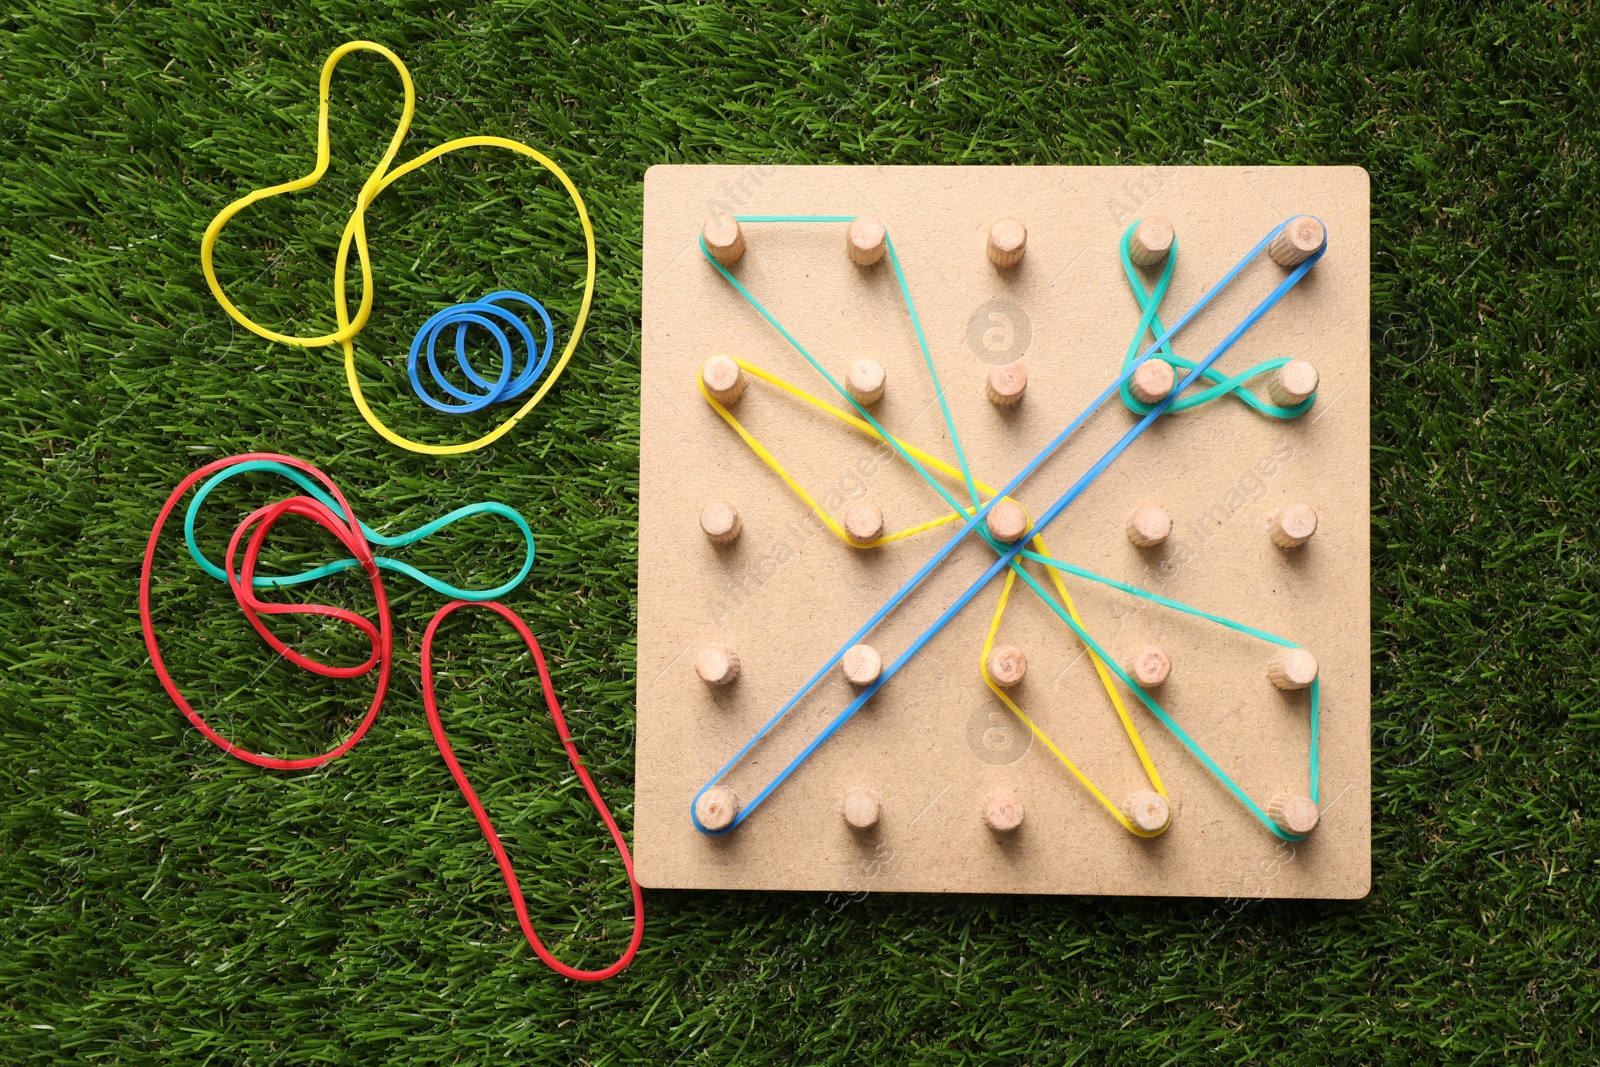 Photo of Wooden geoboard with dragonfly made of rubber bands on artificial grass, flat lay. Educational toy for motor skills development